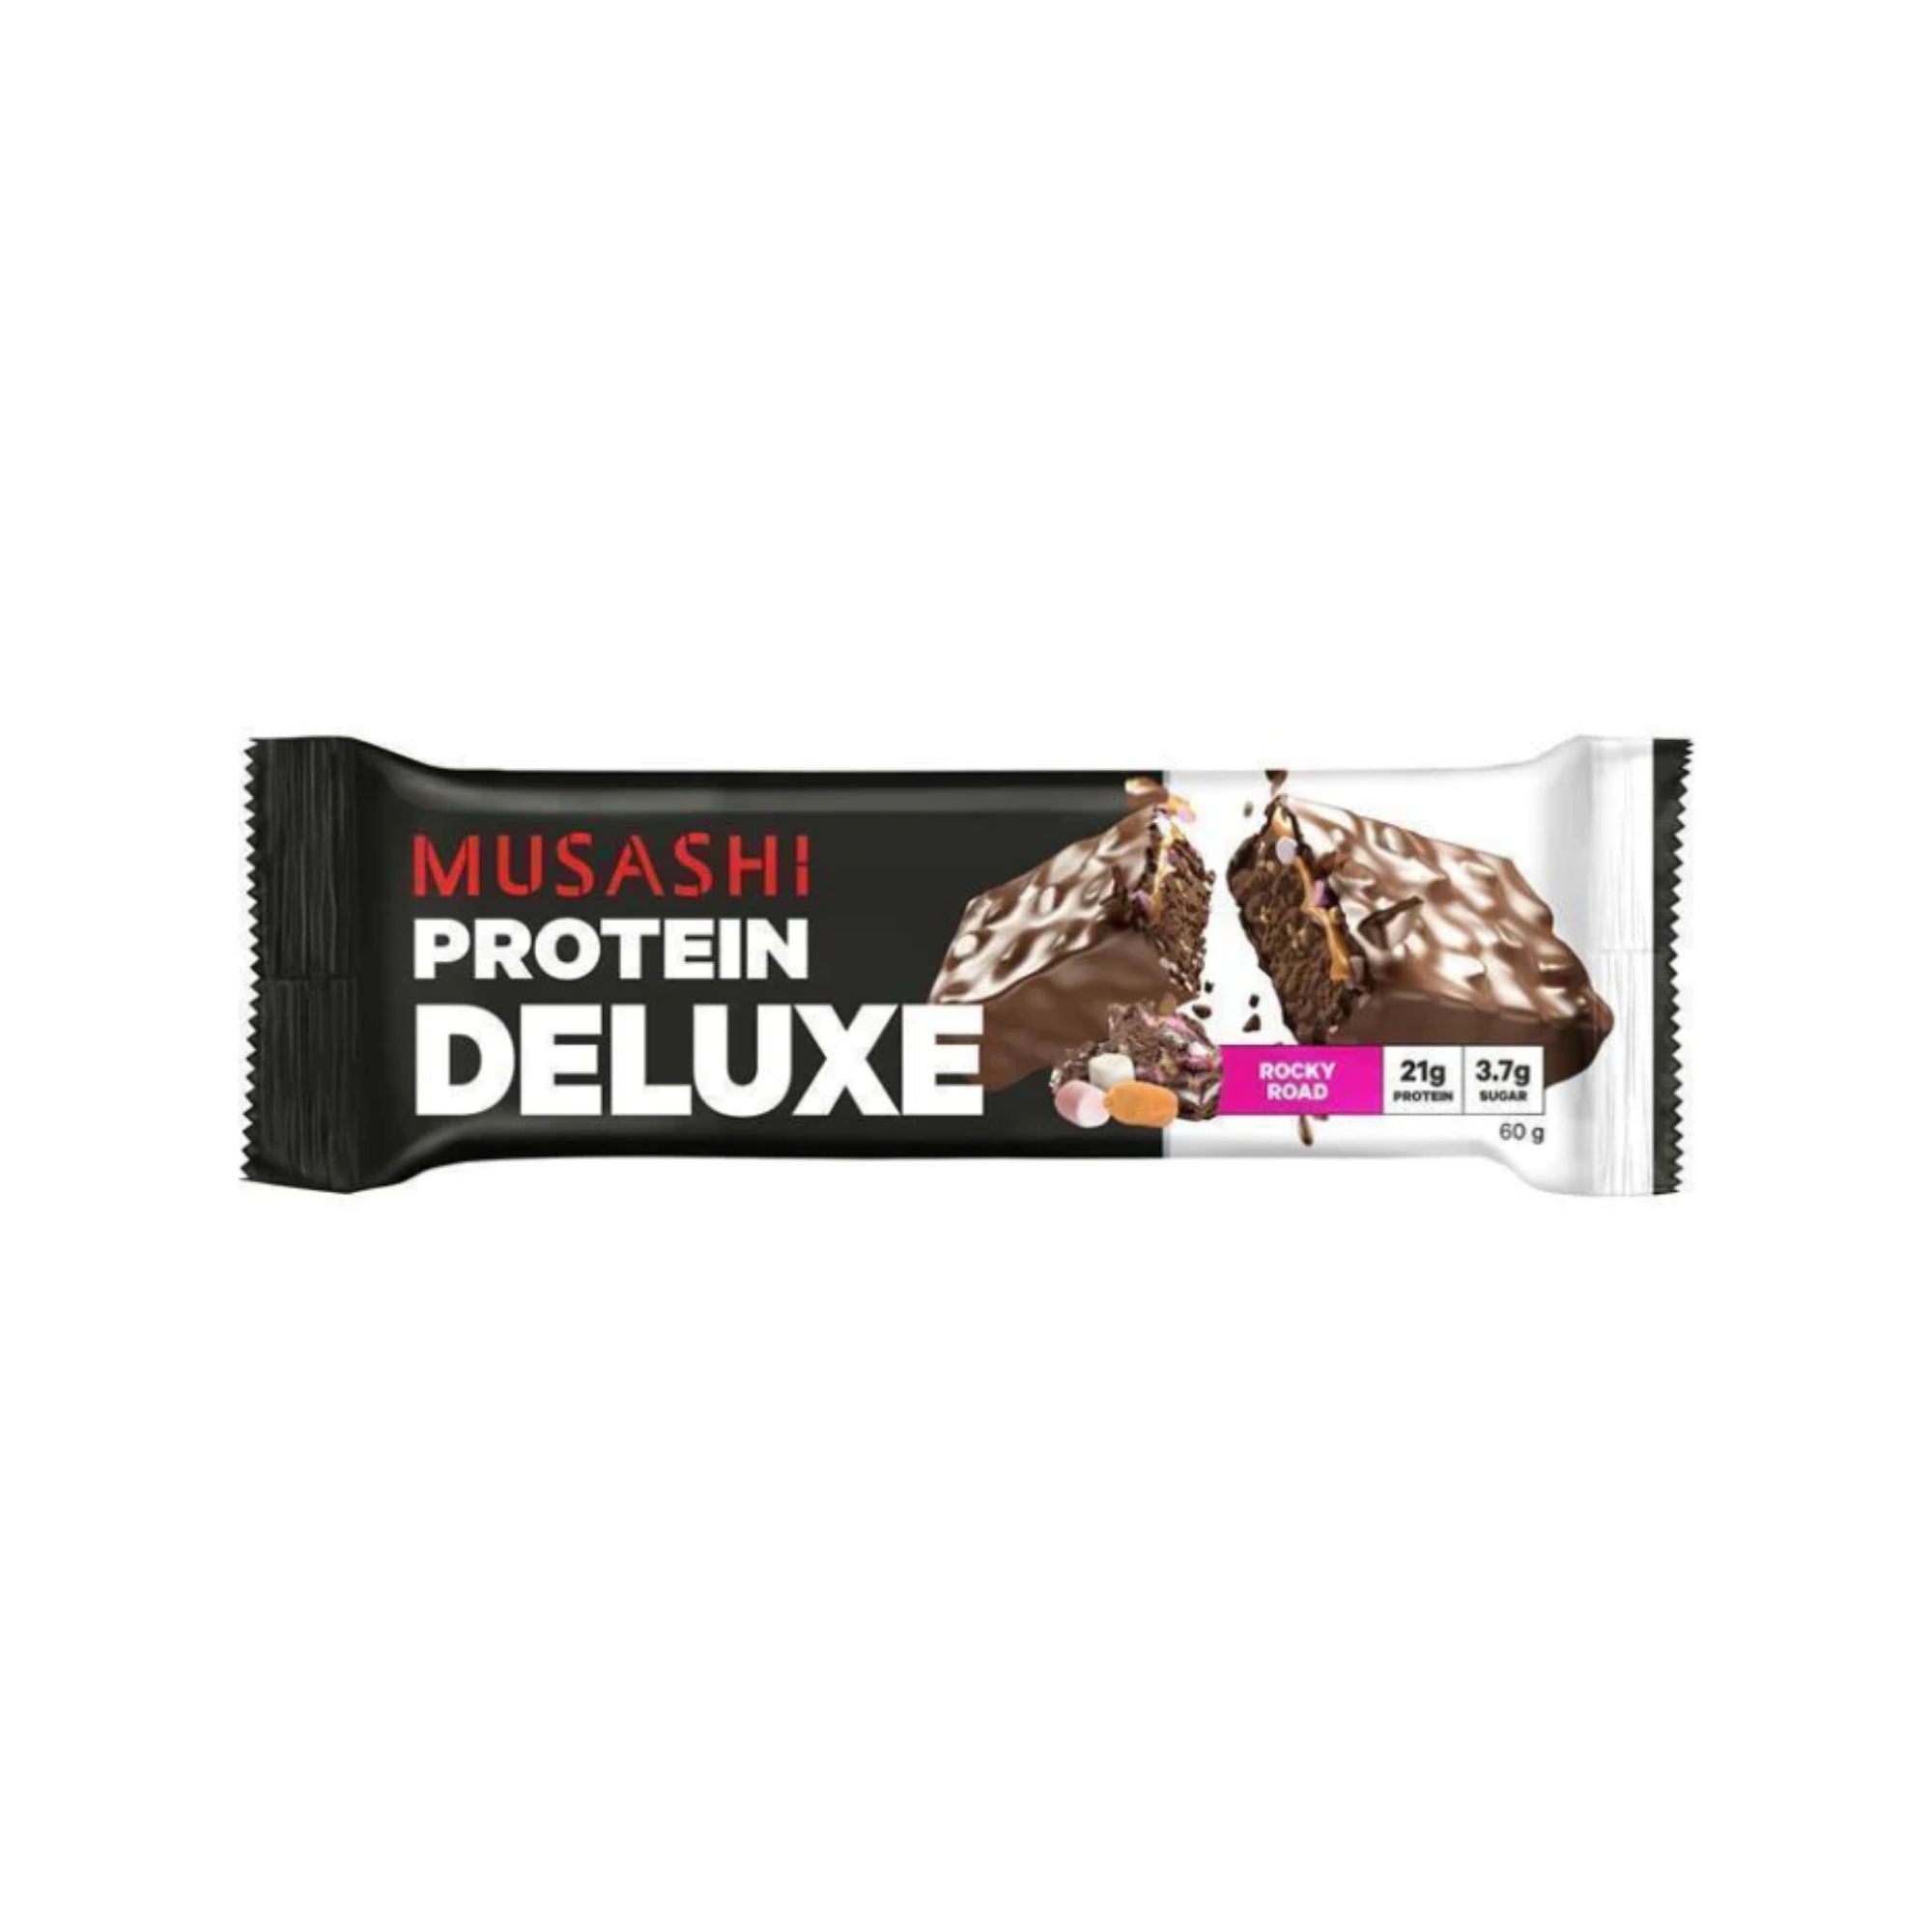 Musashi Protein Deluxe Bar - Rocky Road